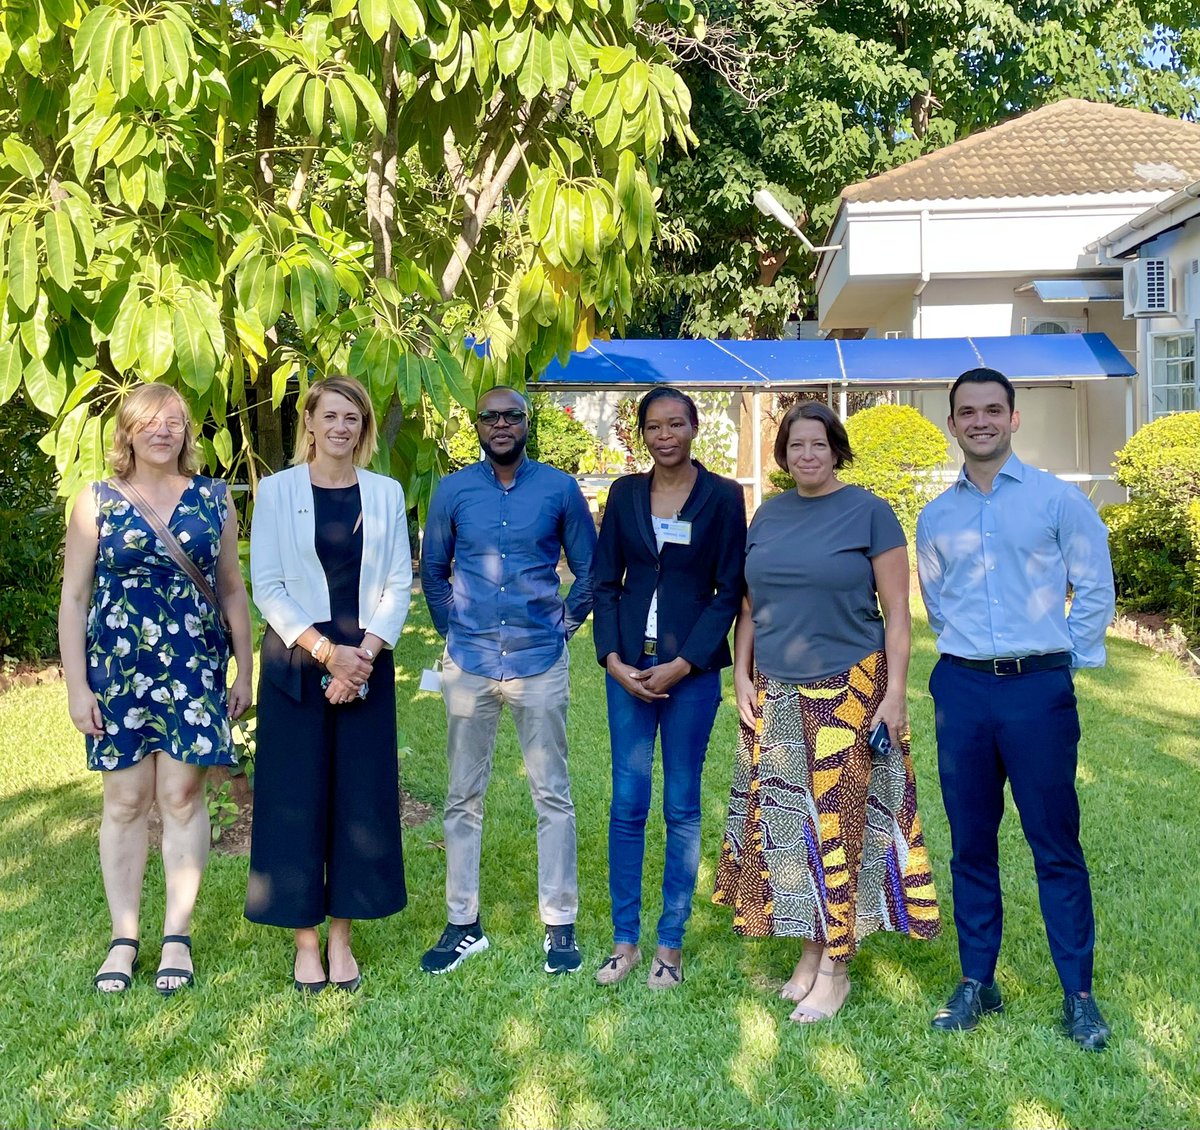 Great to meet @CCMG_Zambia to discuss their important work on election observation and electoral reform in Zambia following the publication of the EU Election Follow Up report 🇿🇲🇪🇺